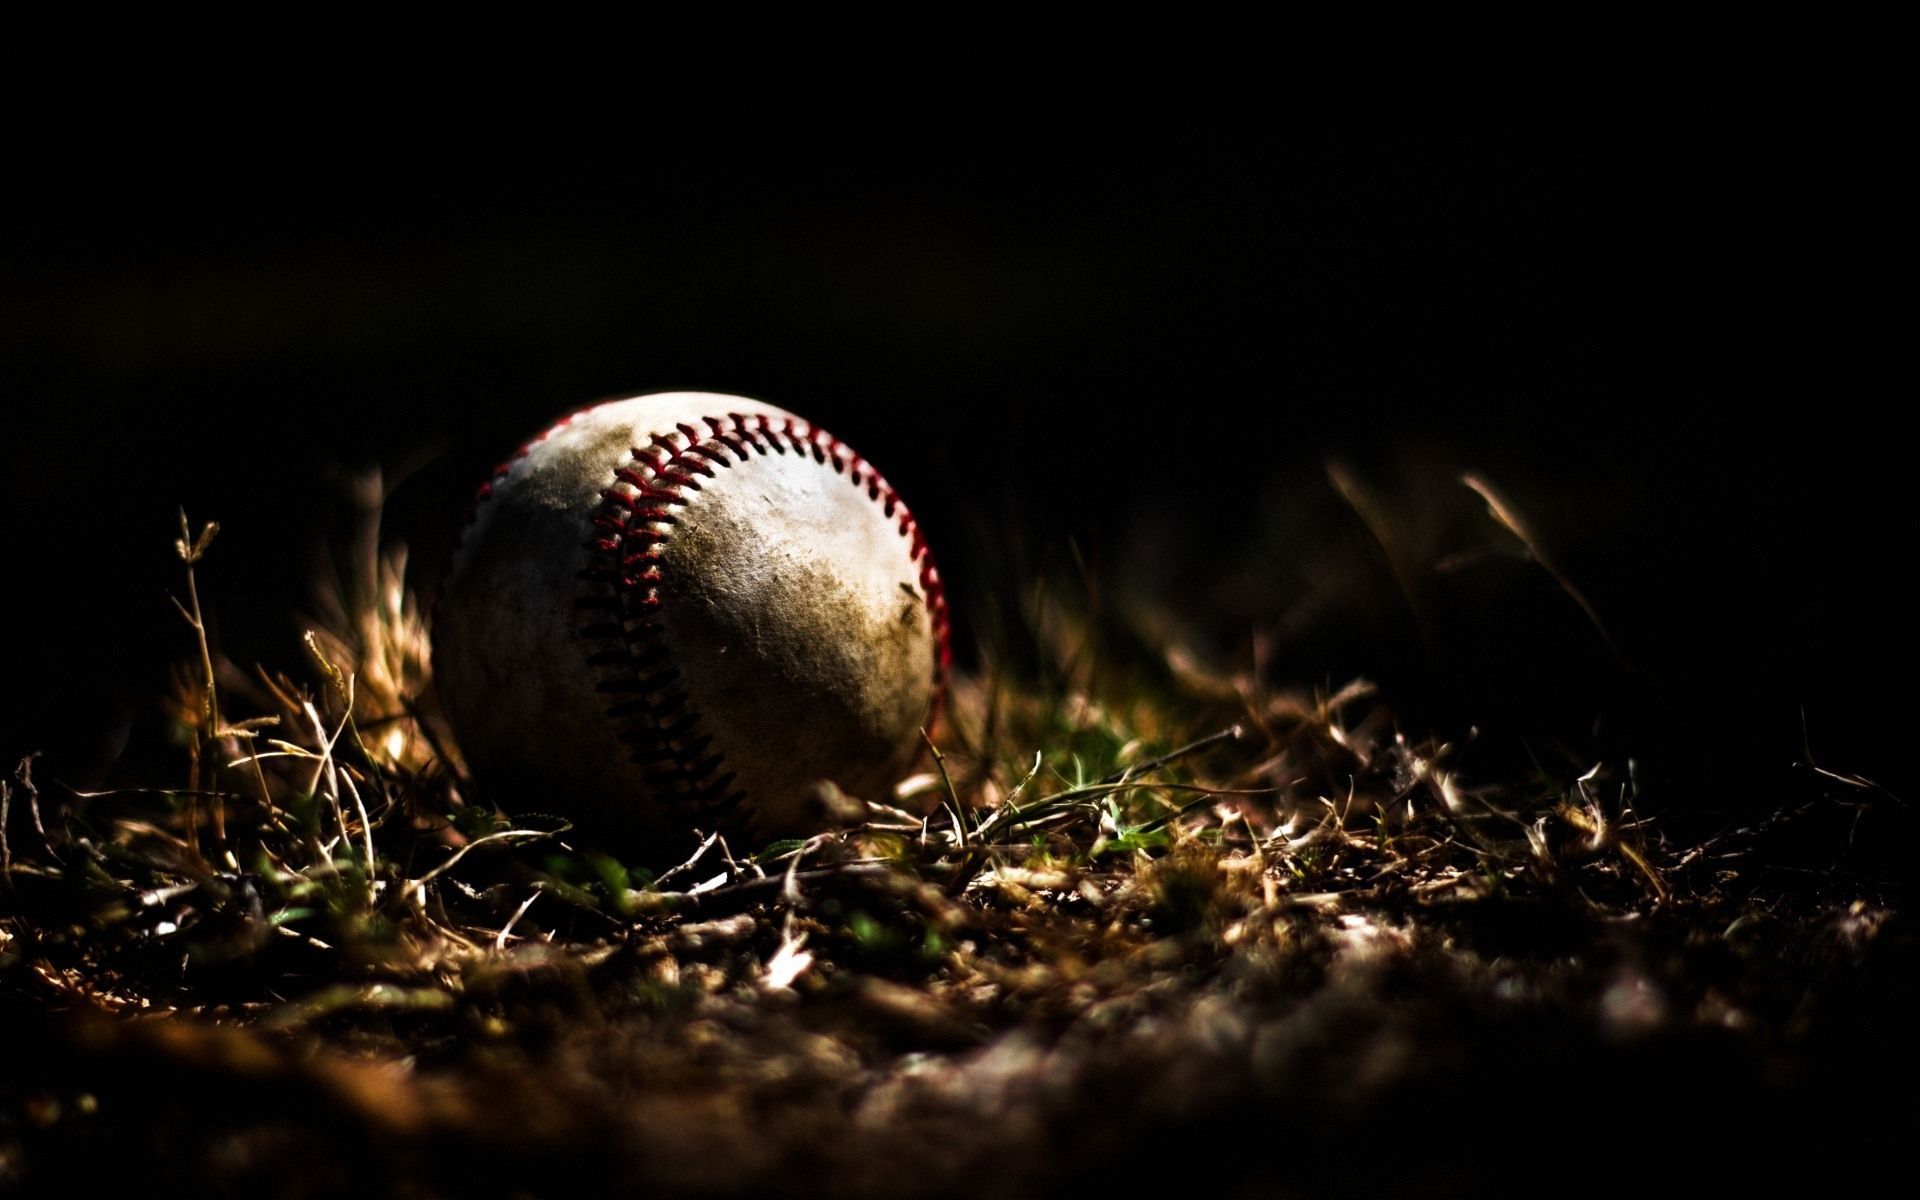 A baseball sitting in the grass on top of dirt - Softball